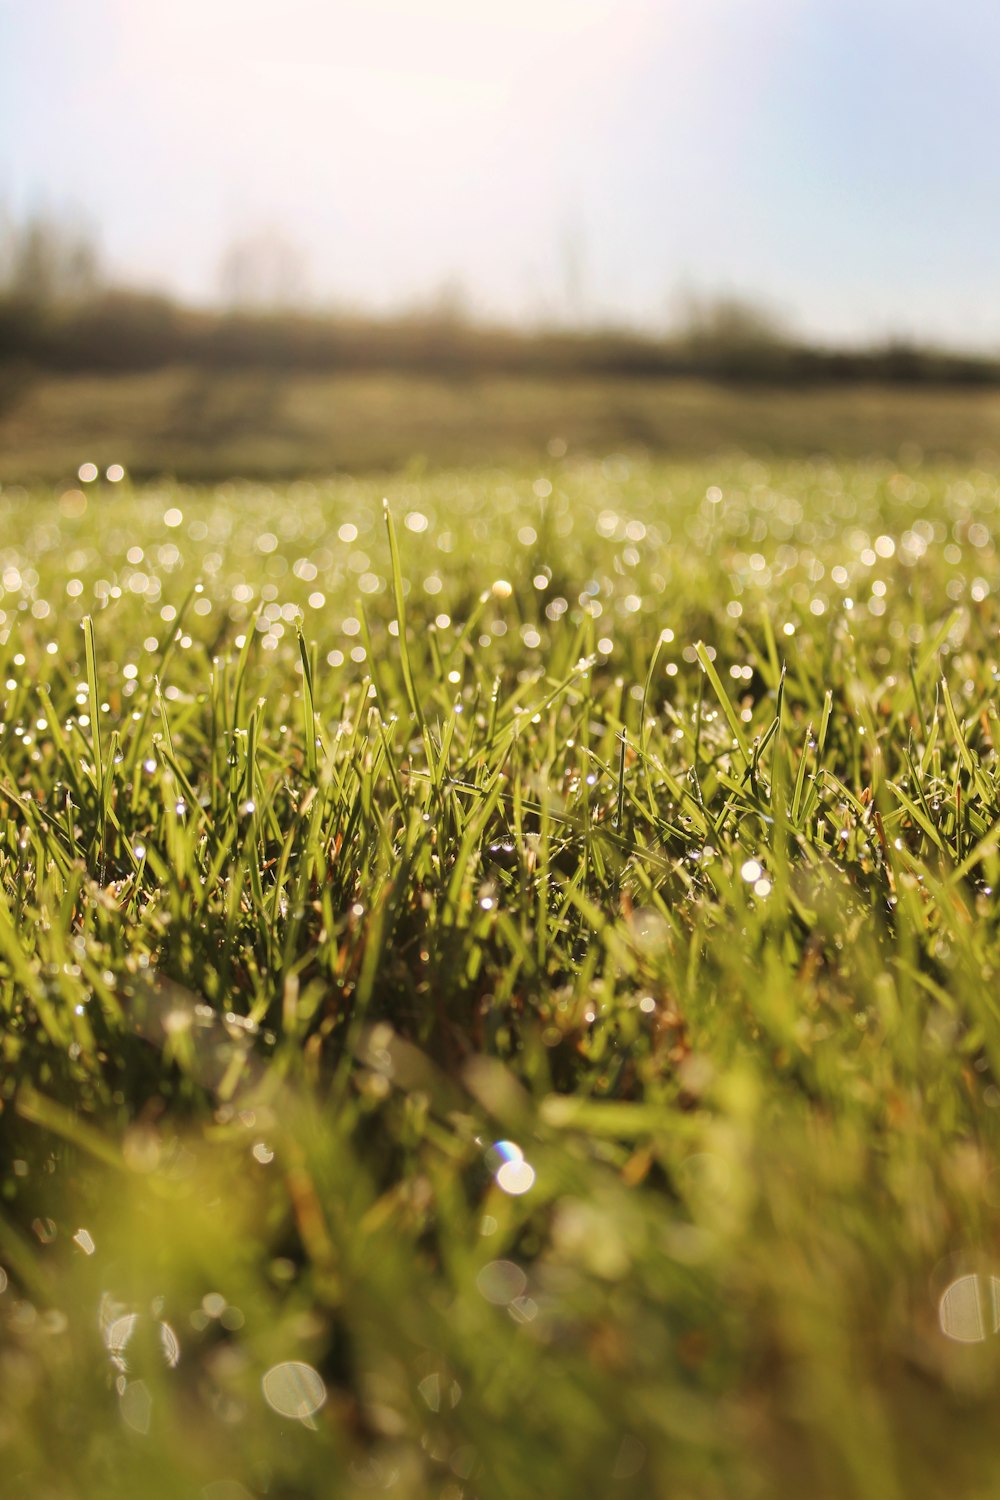 a field of grass with water droplets on it